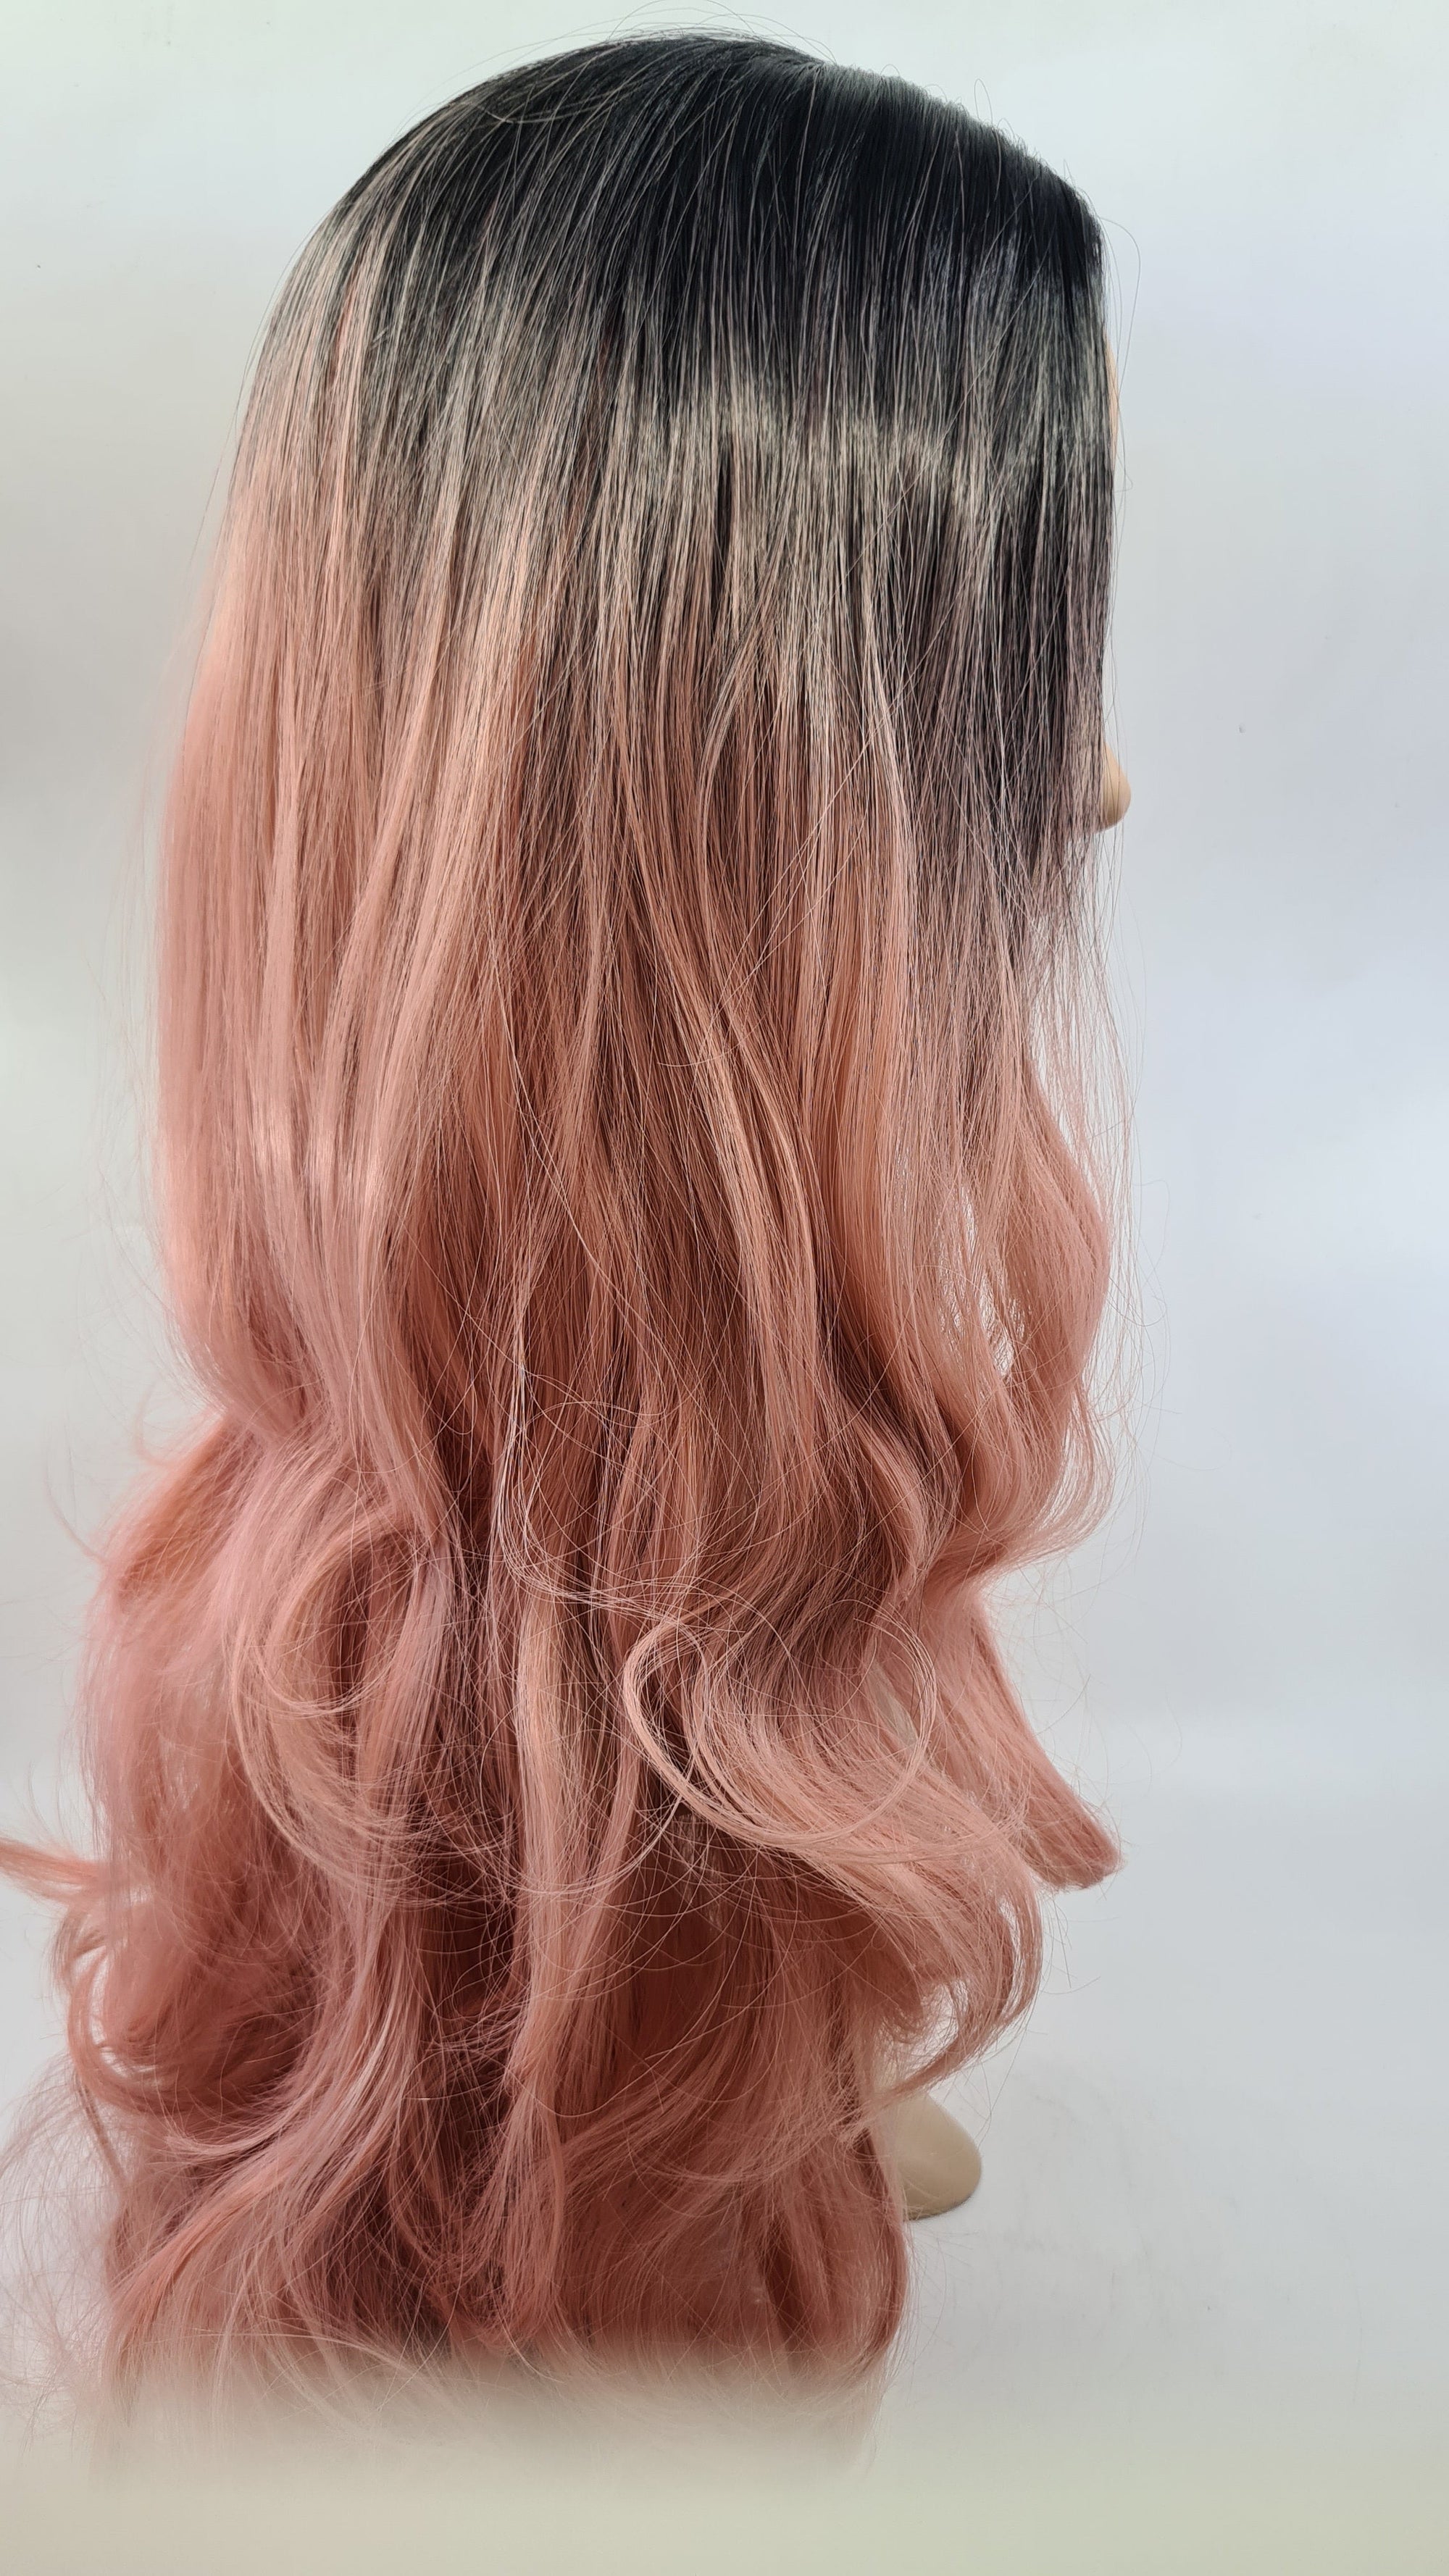 Wig- Samara- Ombre Black to Dusty Pink